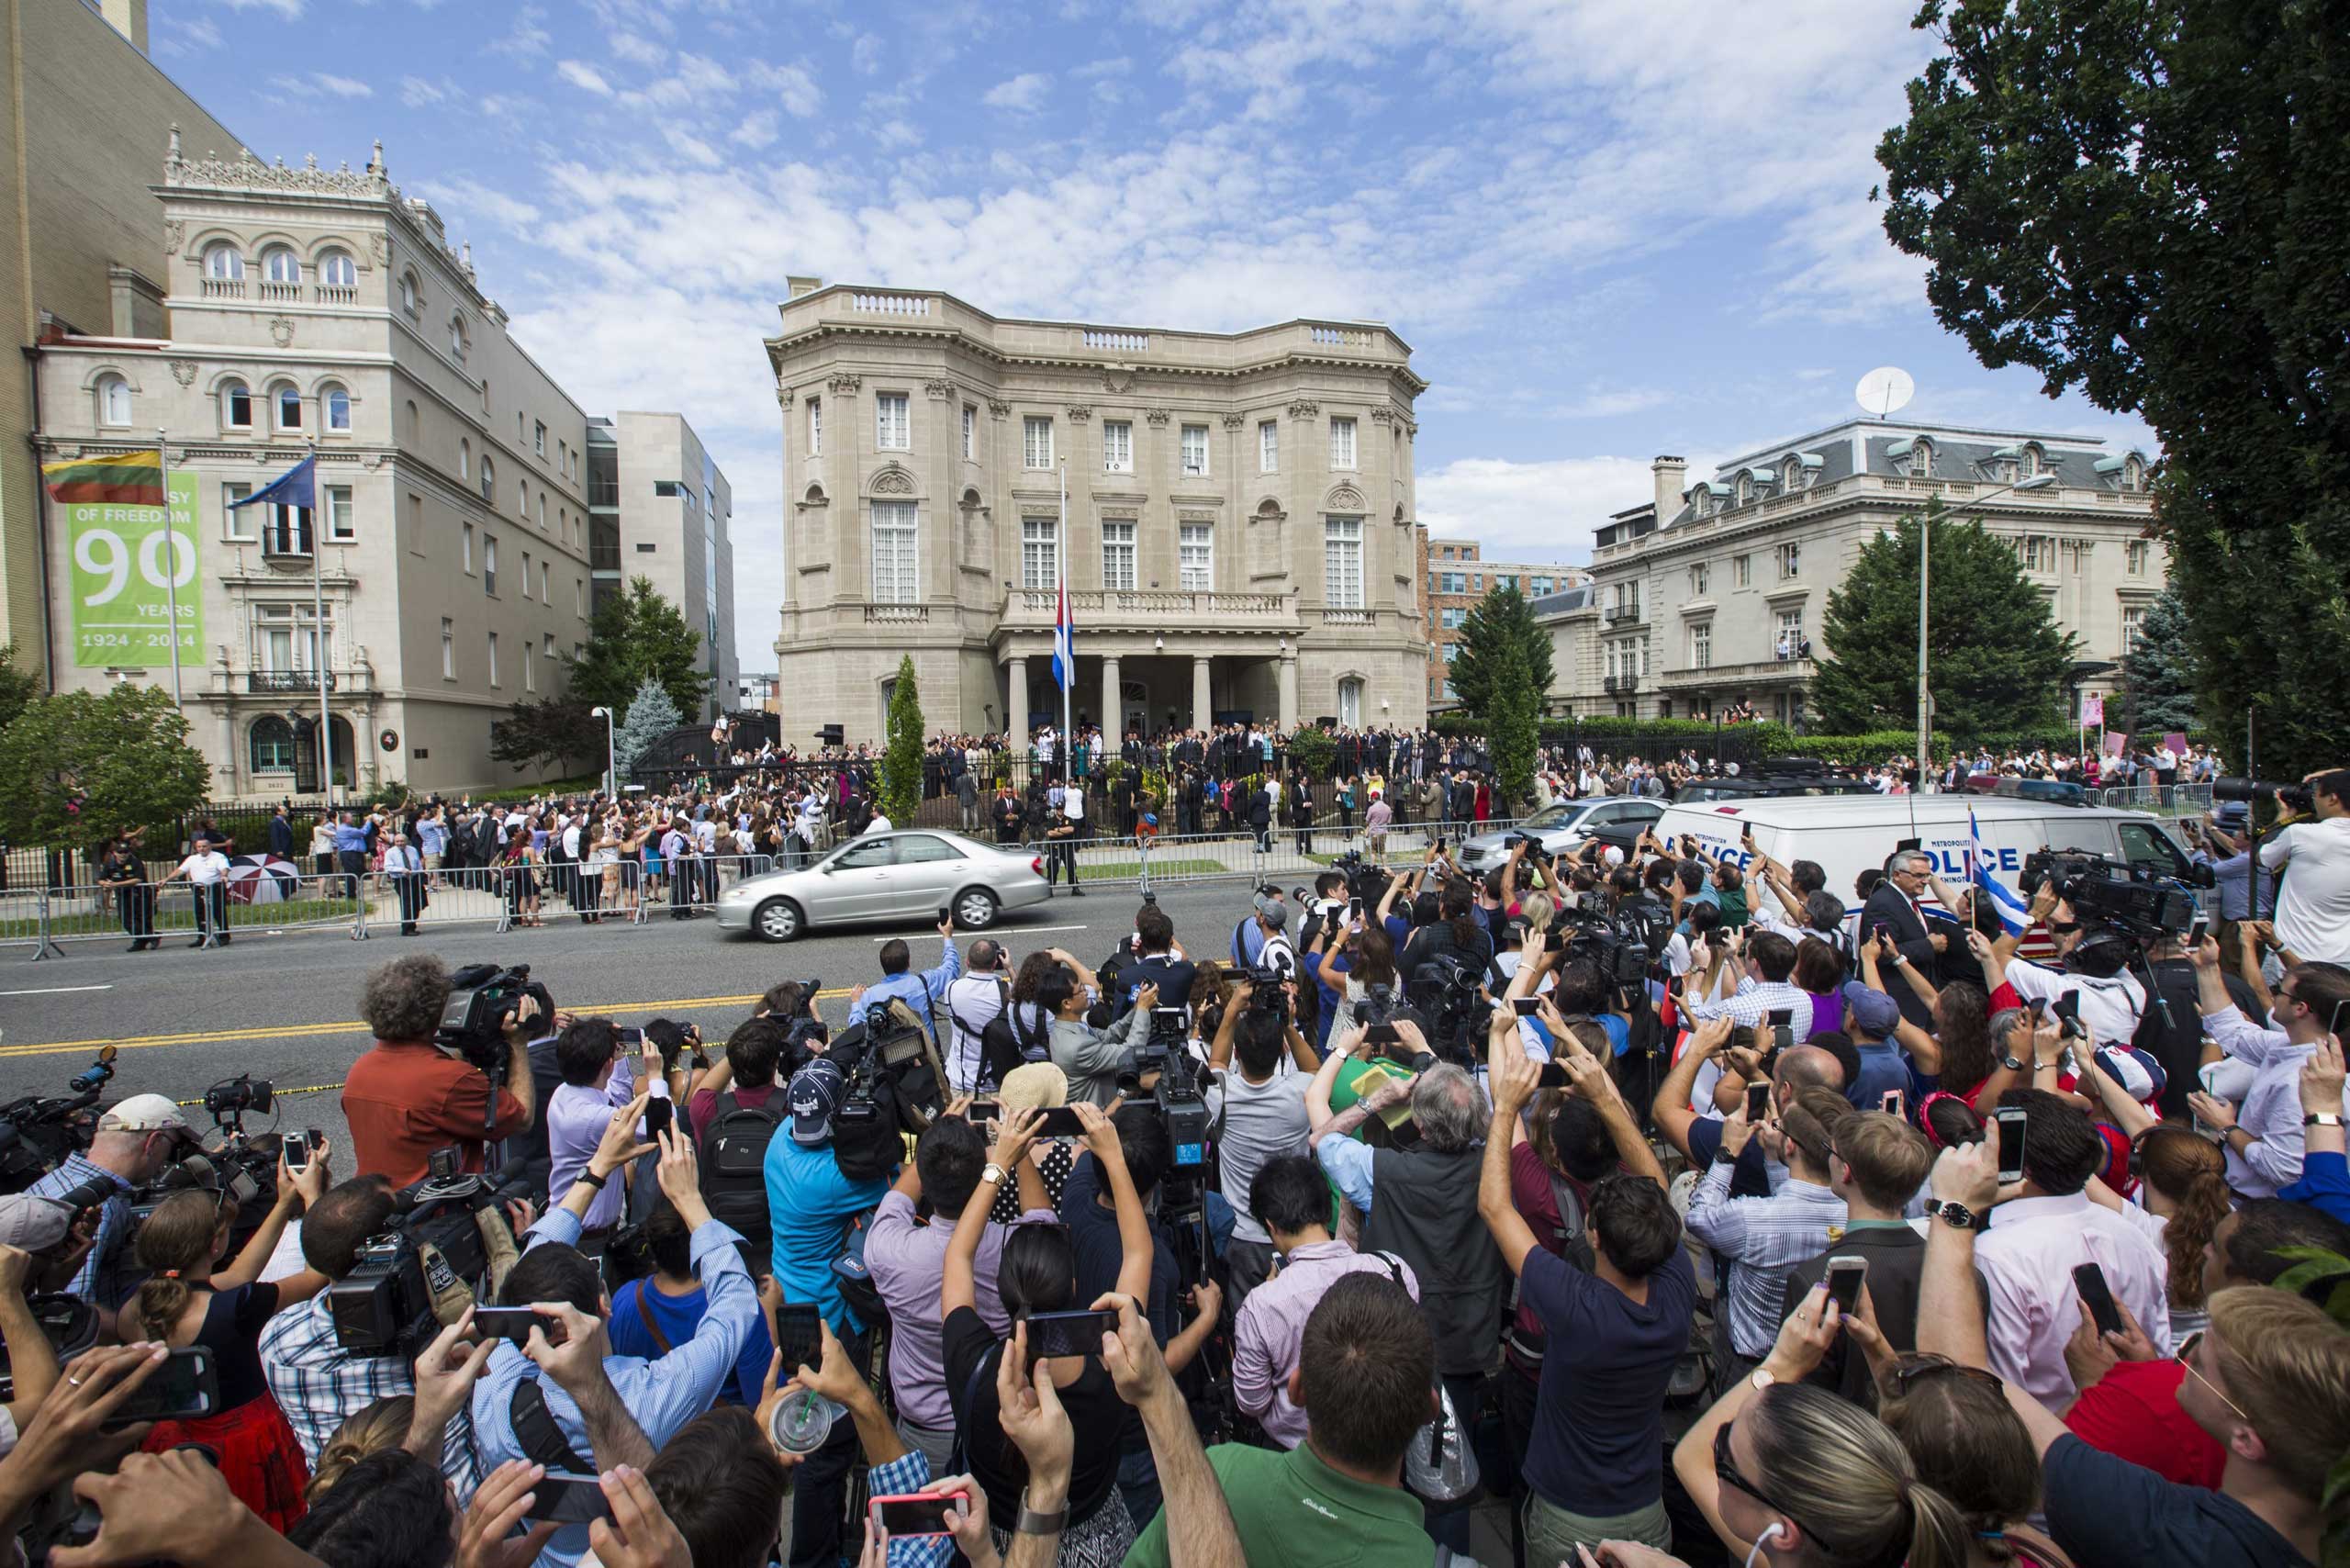 A large crowd of people gather to watch the Cuban flag being raised outside the Cuban embassy in Washington on July 20, 2015.